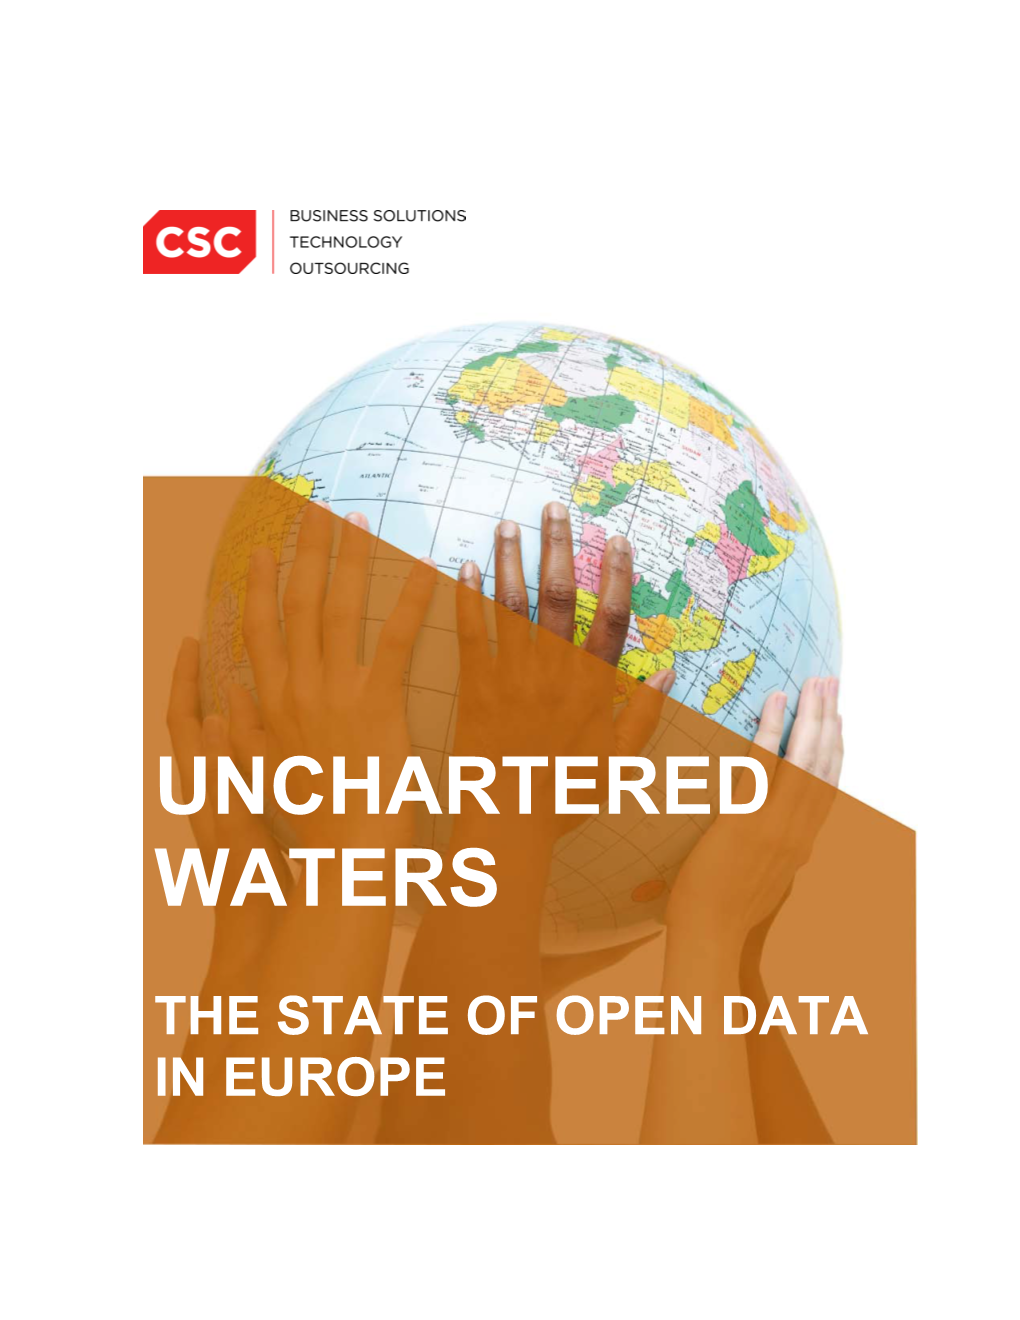 UNCHARTERED WATERS the State of Open Data in Europe